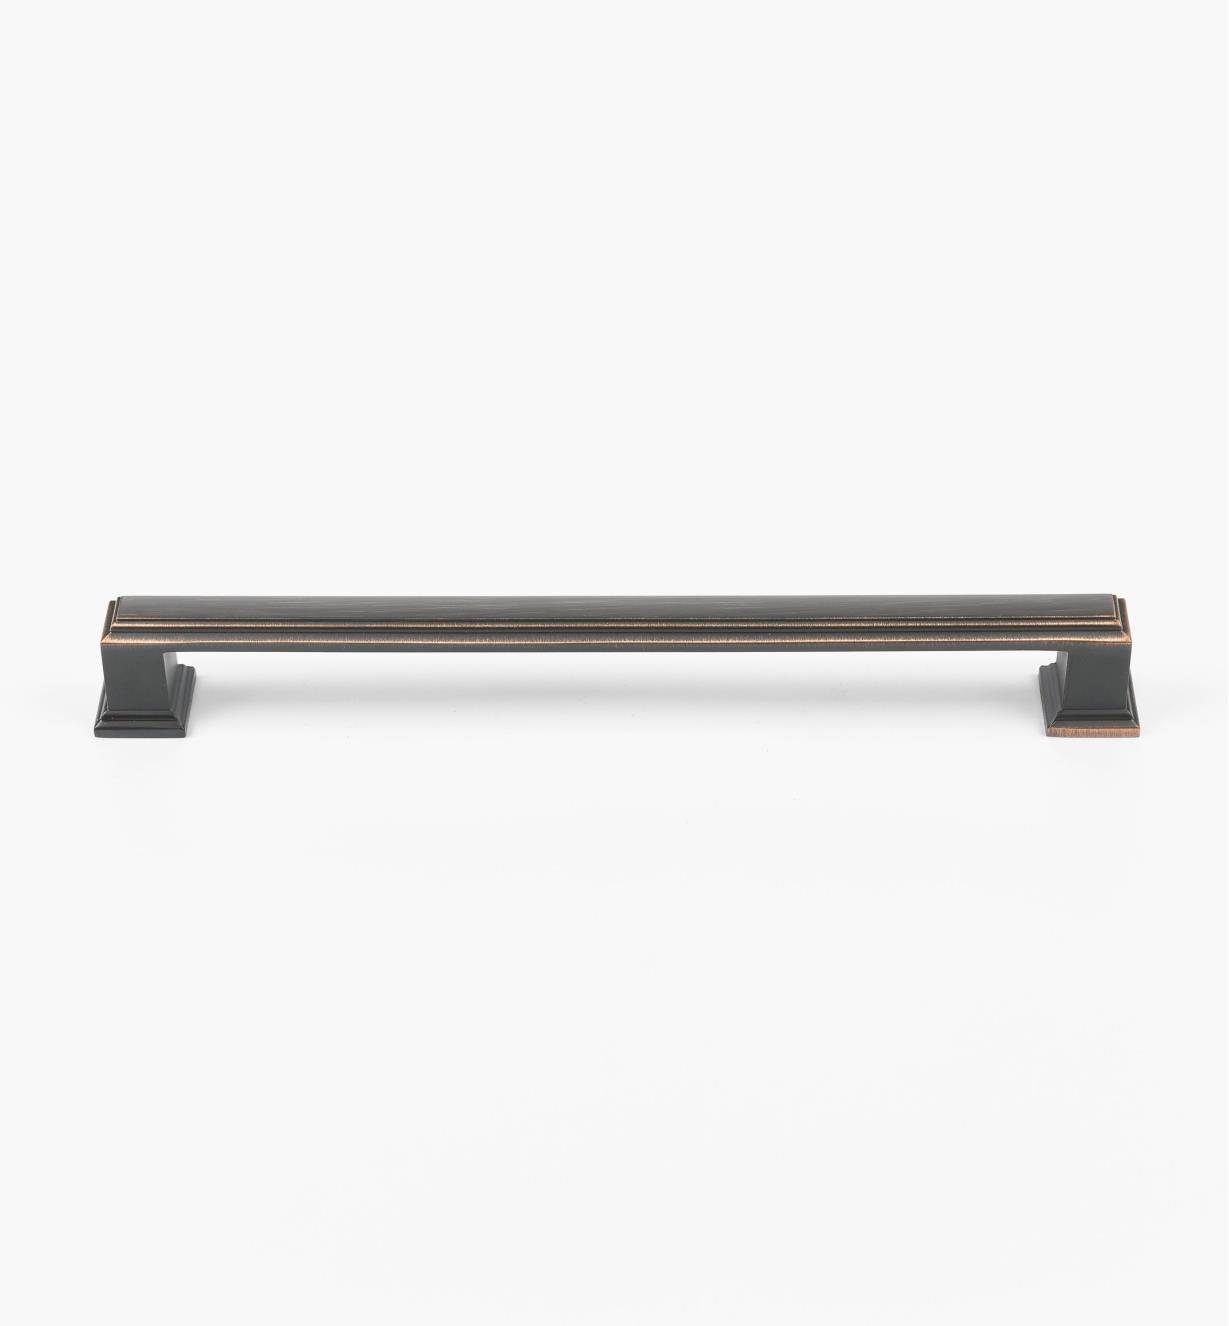 02A2535 - 192mm Oil-Rubbed Bronze Appoint Handle